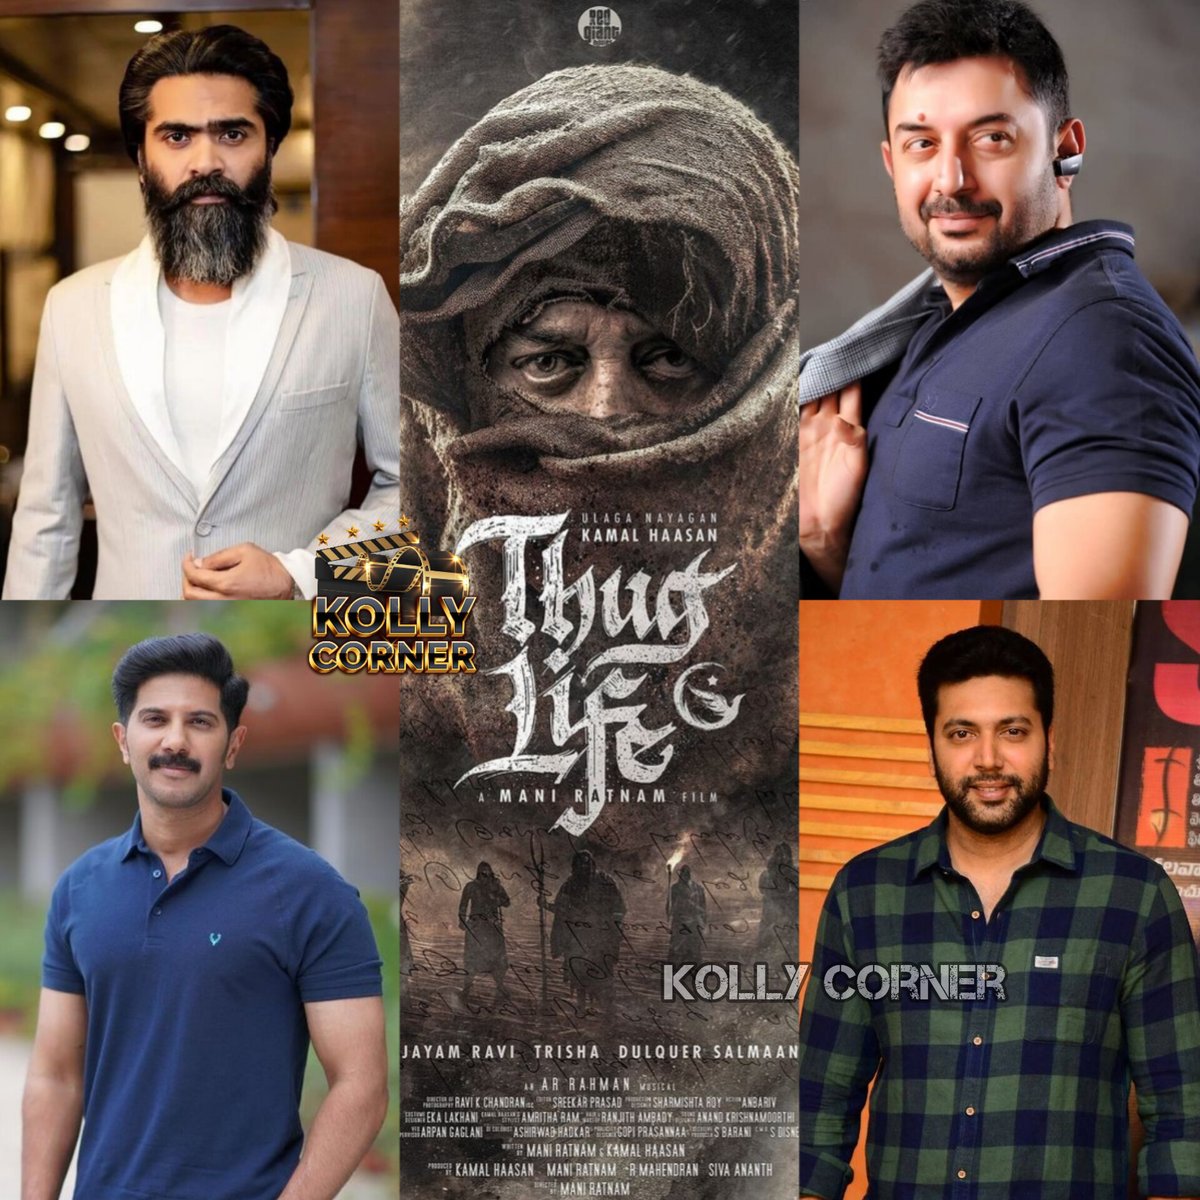 #Thuglife Update As Per TOI 🌟

- Ulaganaygan #KamalHaasan will be seen in a triple role 😃
- #SilambarasanTR and #ArvindSwamy have replaced #DulquerSalmaan and #JayamRavi respectively 😯
- Serbia schedule will resume in April end 👌
- Said to be a periodic action drama 🔥…